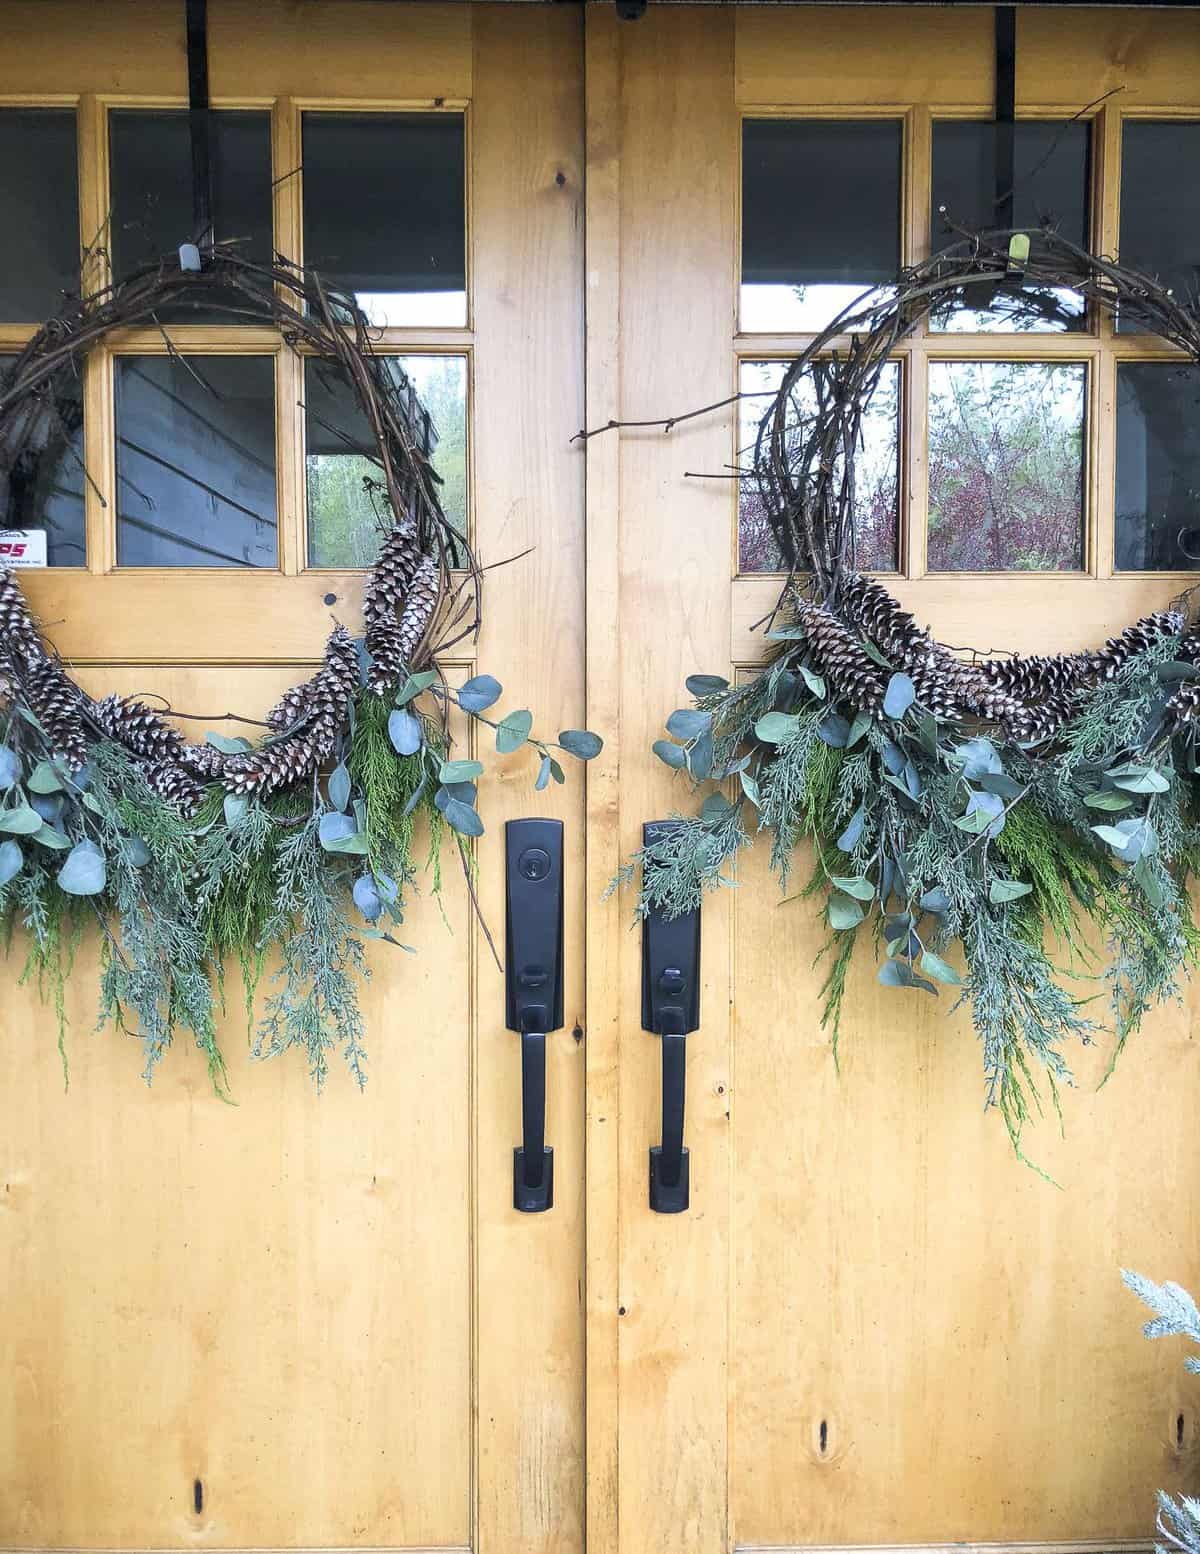 Are you looking for an affordable Christmas wreath? Make your own! Click for a tutorial on how to make a DIY Christmas grapevine wreath. #christmaswreath